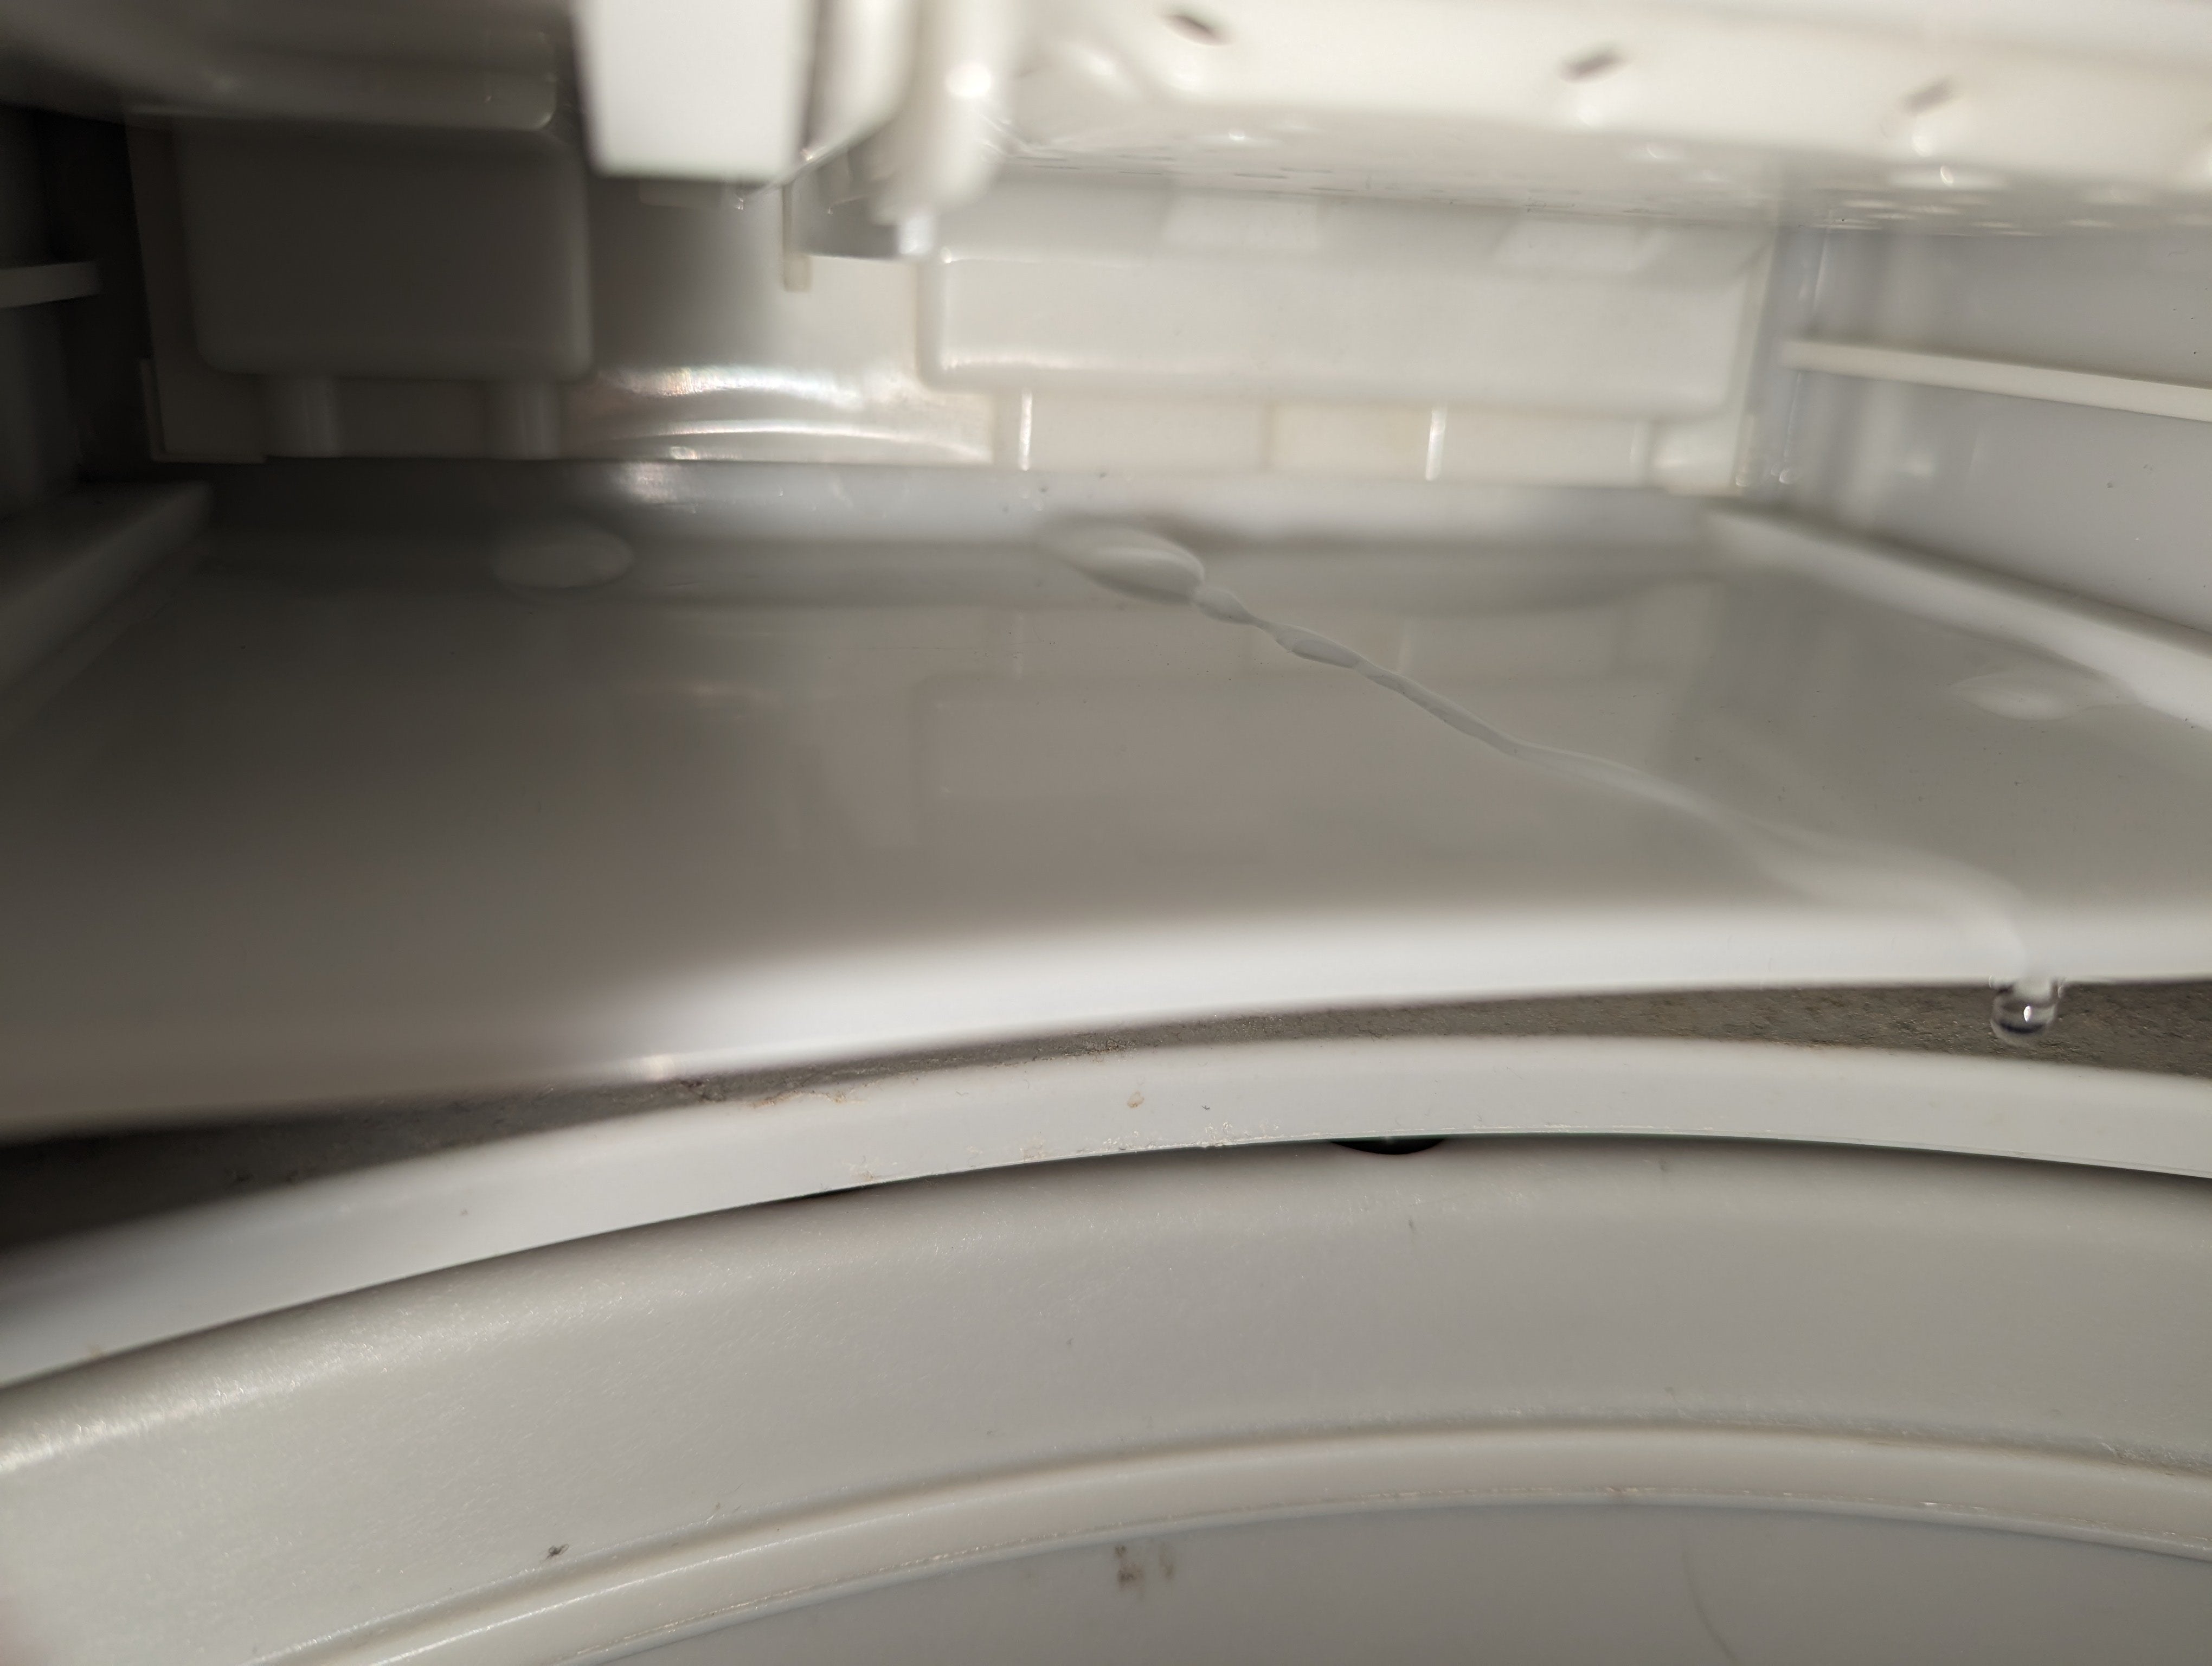 Troubleshooting LG top load washer, leaking detergent tray | DIY Home ...